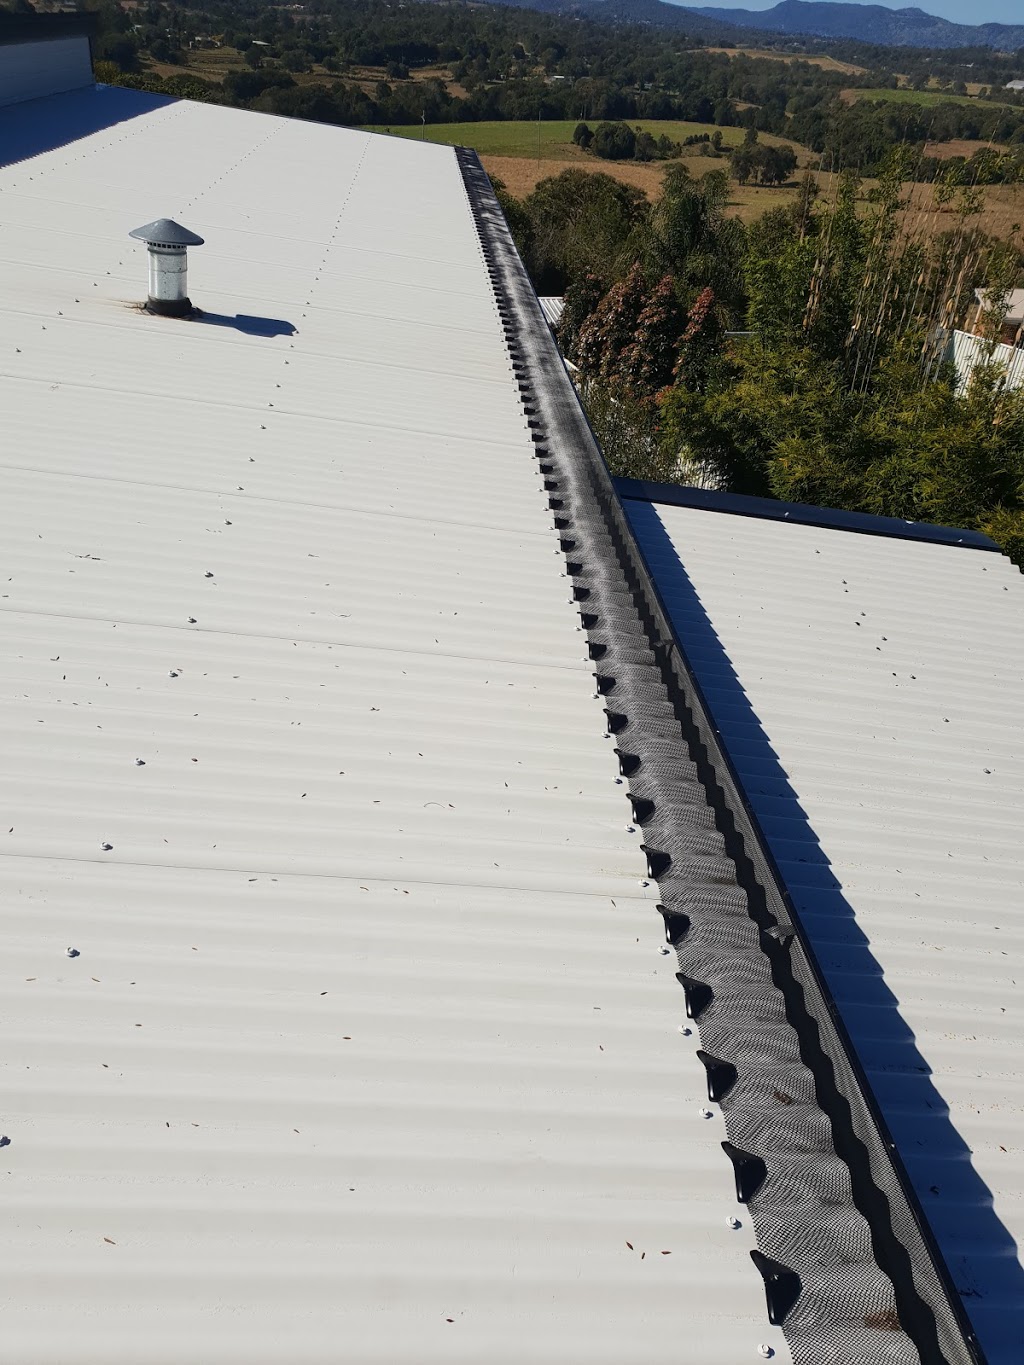 Fraser Coast Gutter Protect | roofing contractor | Shed 3/104 Boat Harbour Dr, Pialba QLD 4655, Australia | 0459327677 OR +61 459 327 677